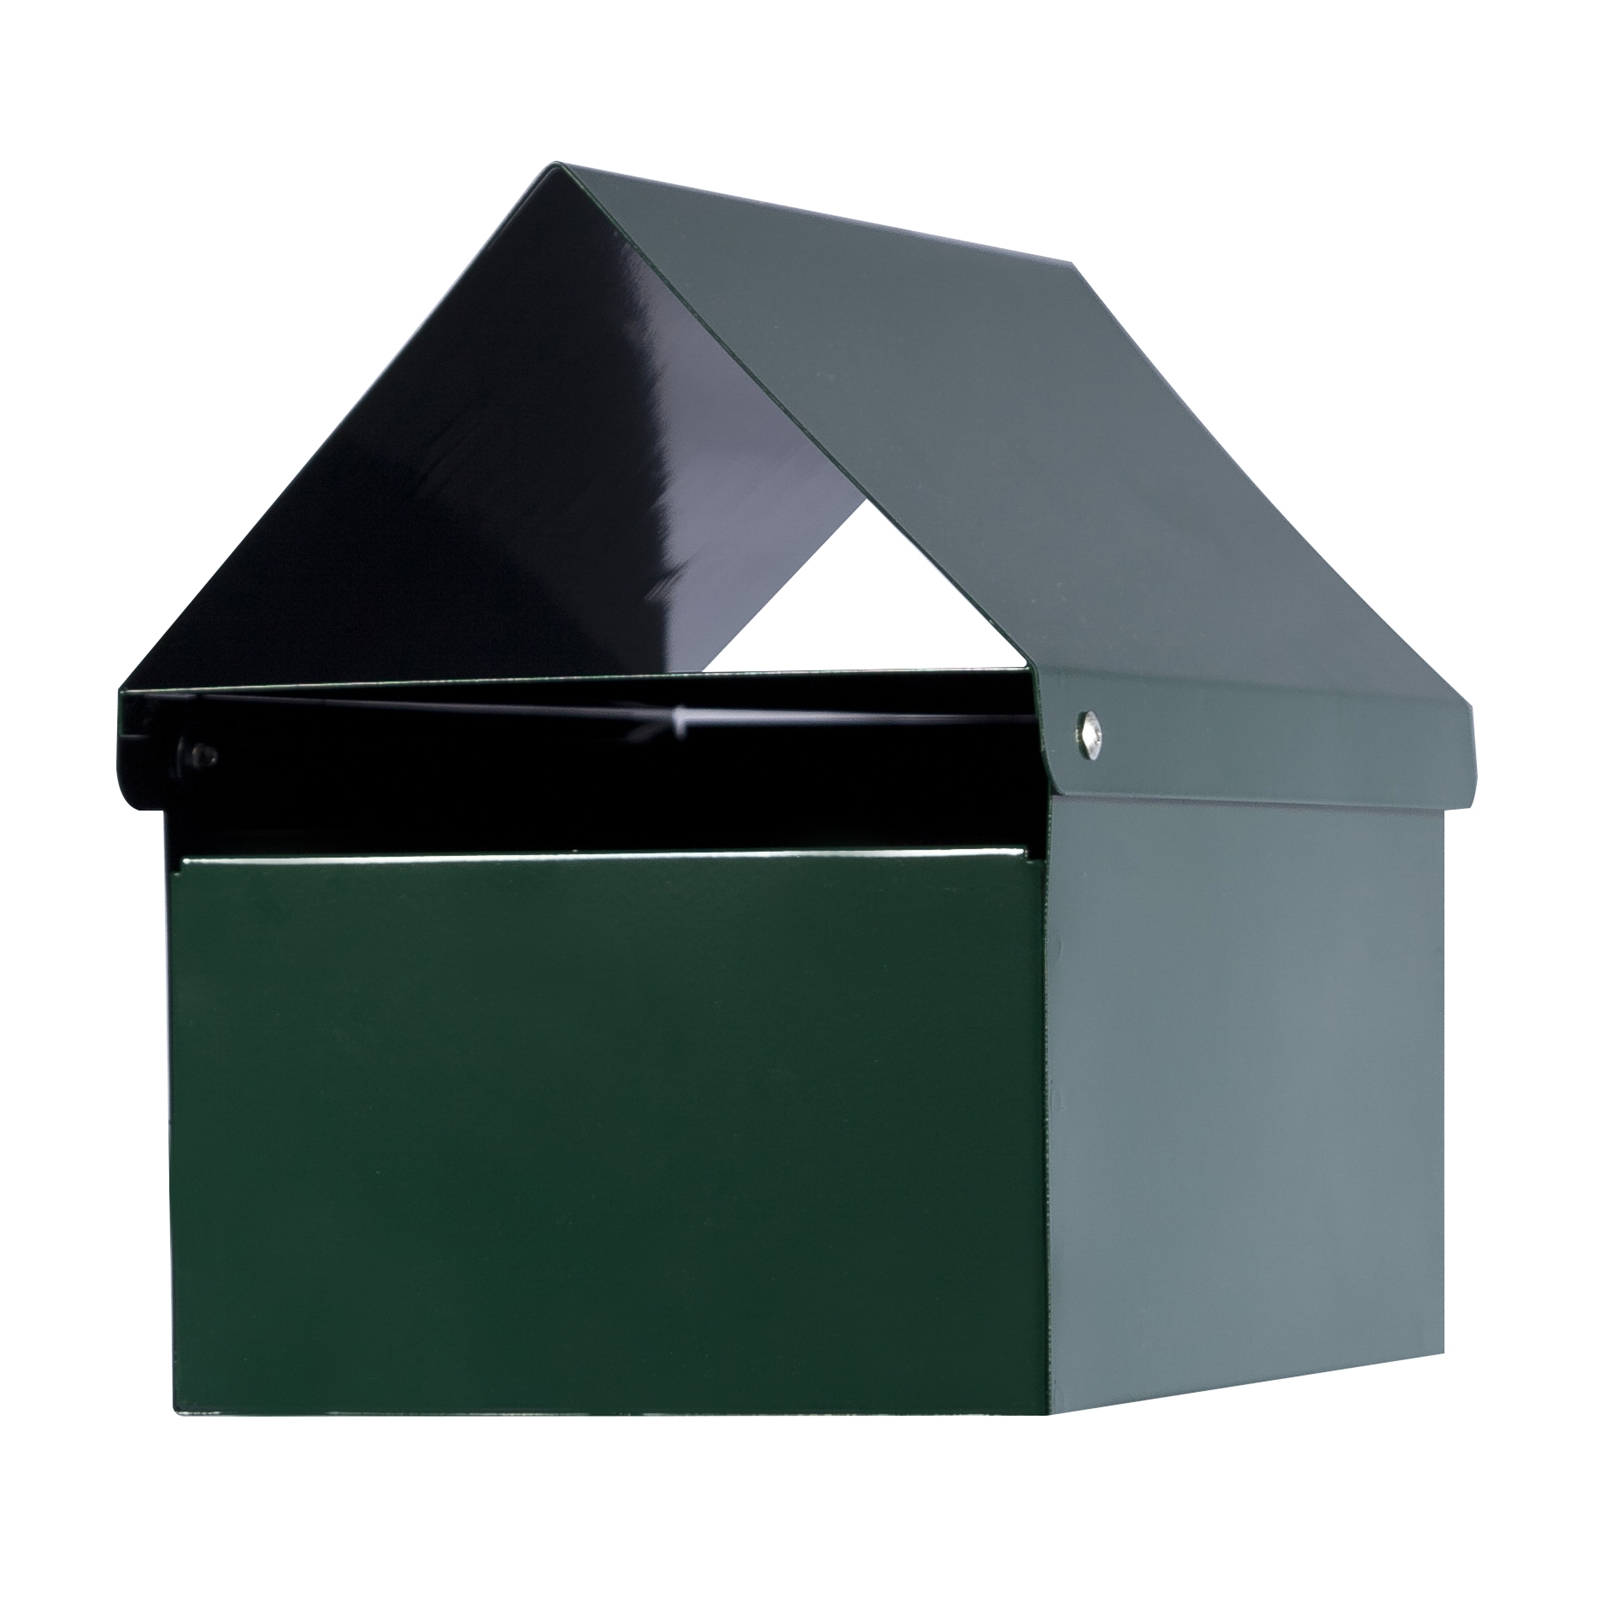 Sandleford Economy Green Crest Post Mounted Letterbox